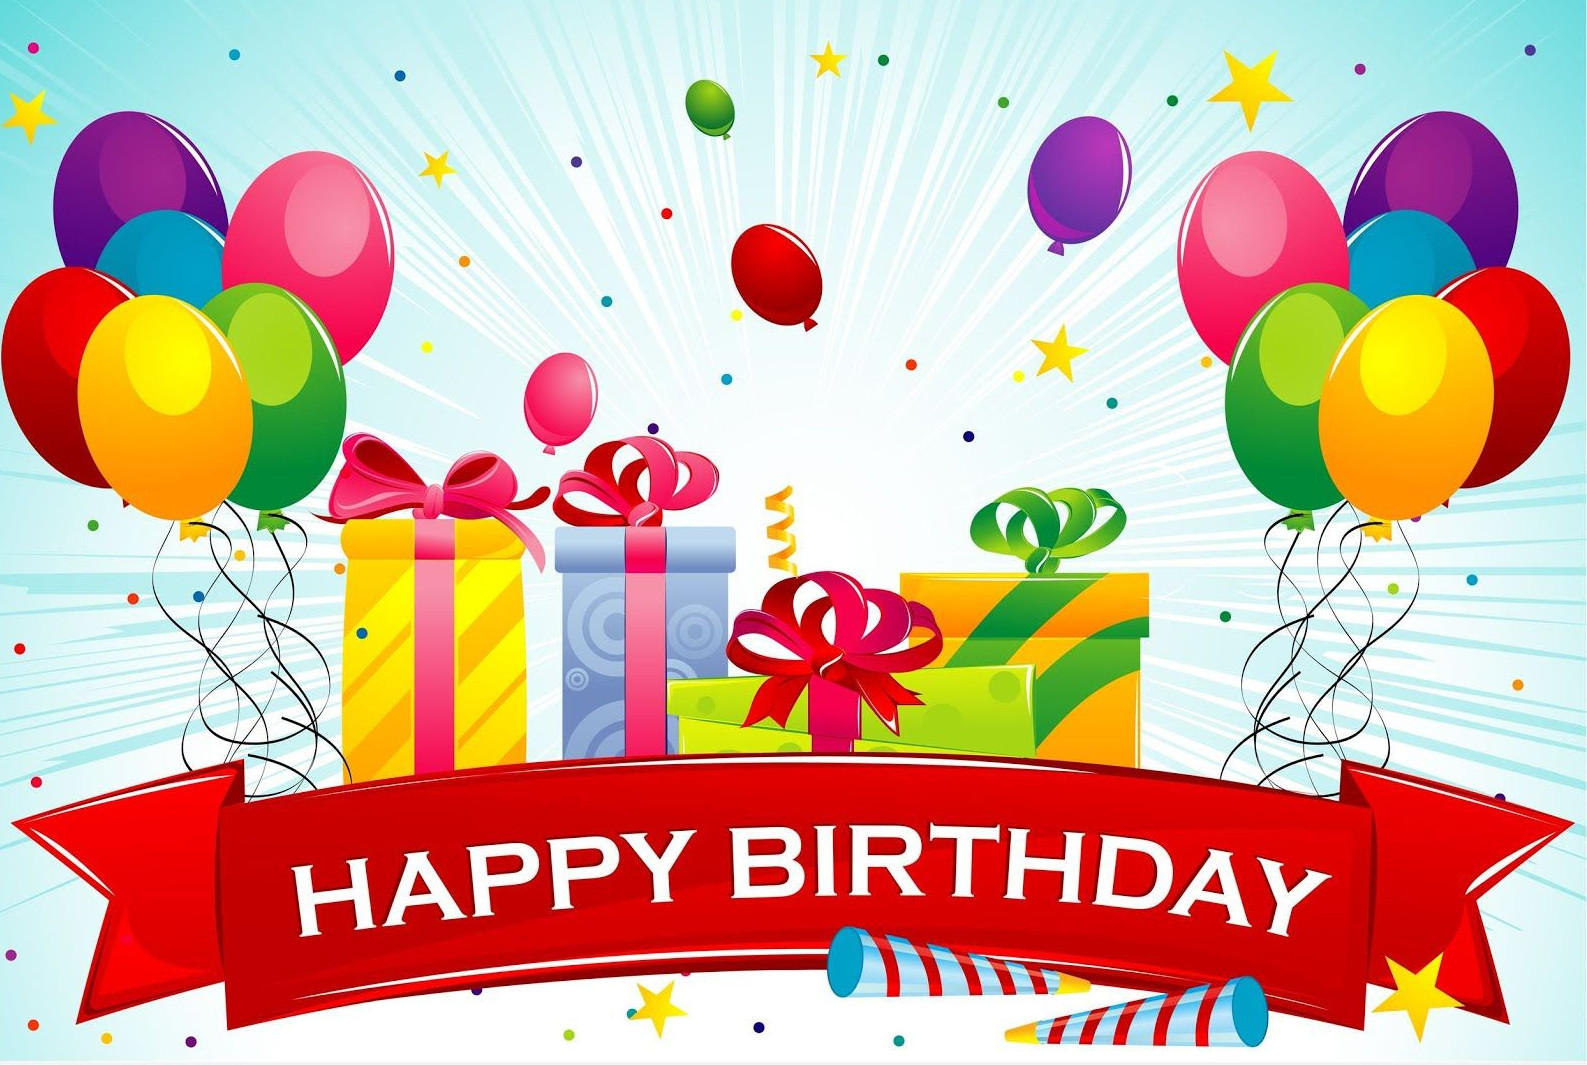 Happy Birthday Greeting Cards
 35 Happy Birthday Cards Free To Download – The WoW Style